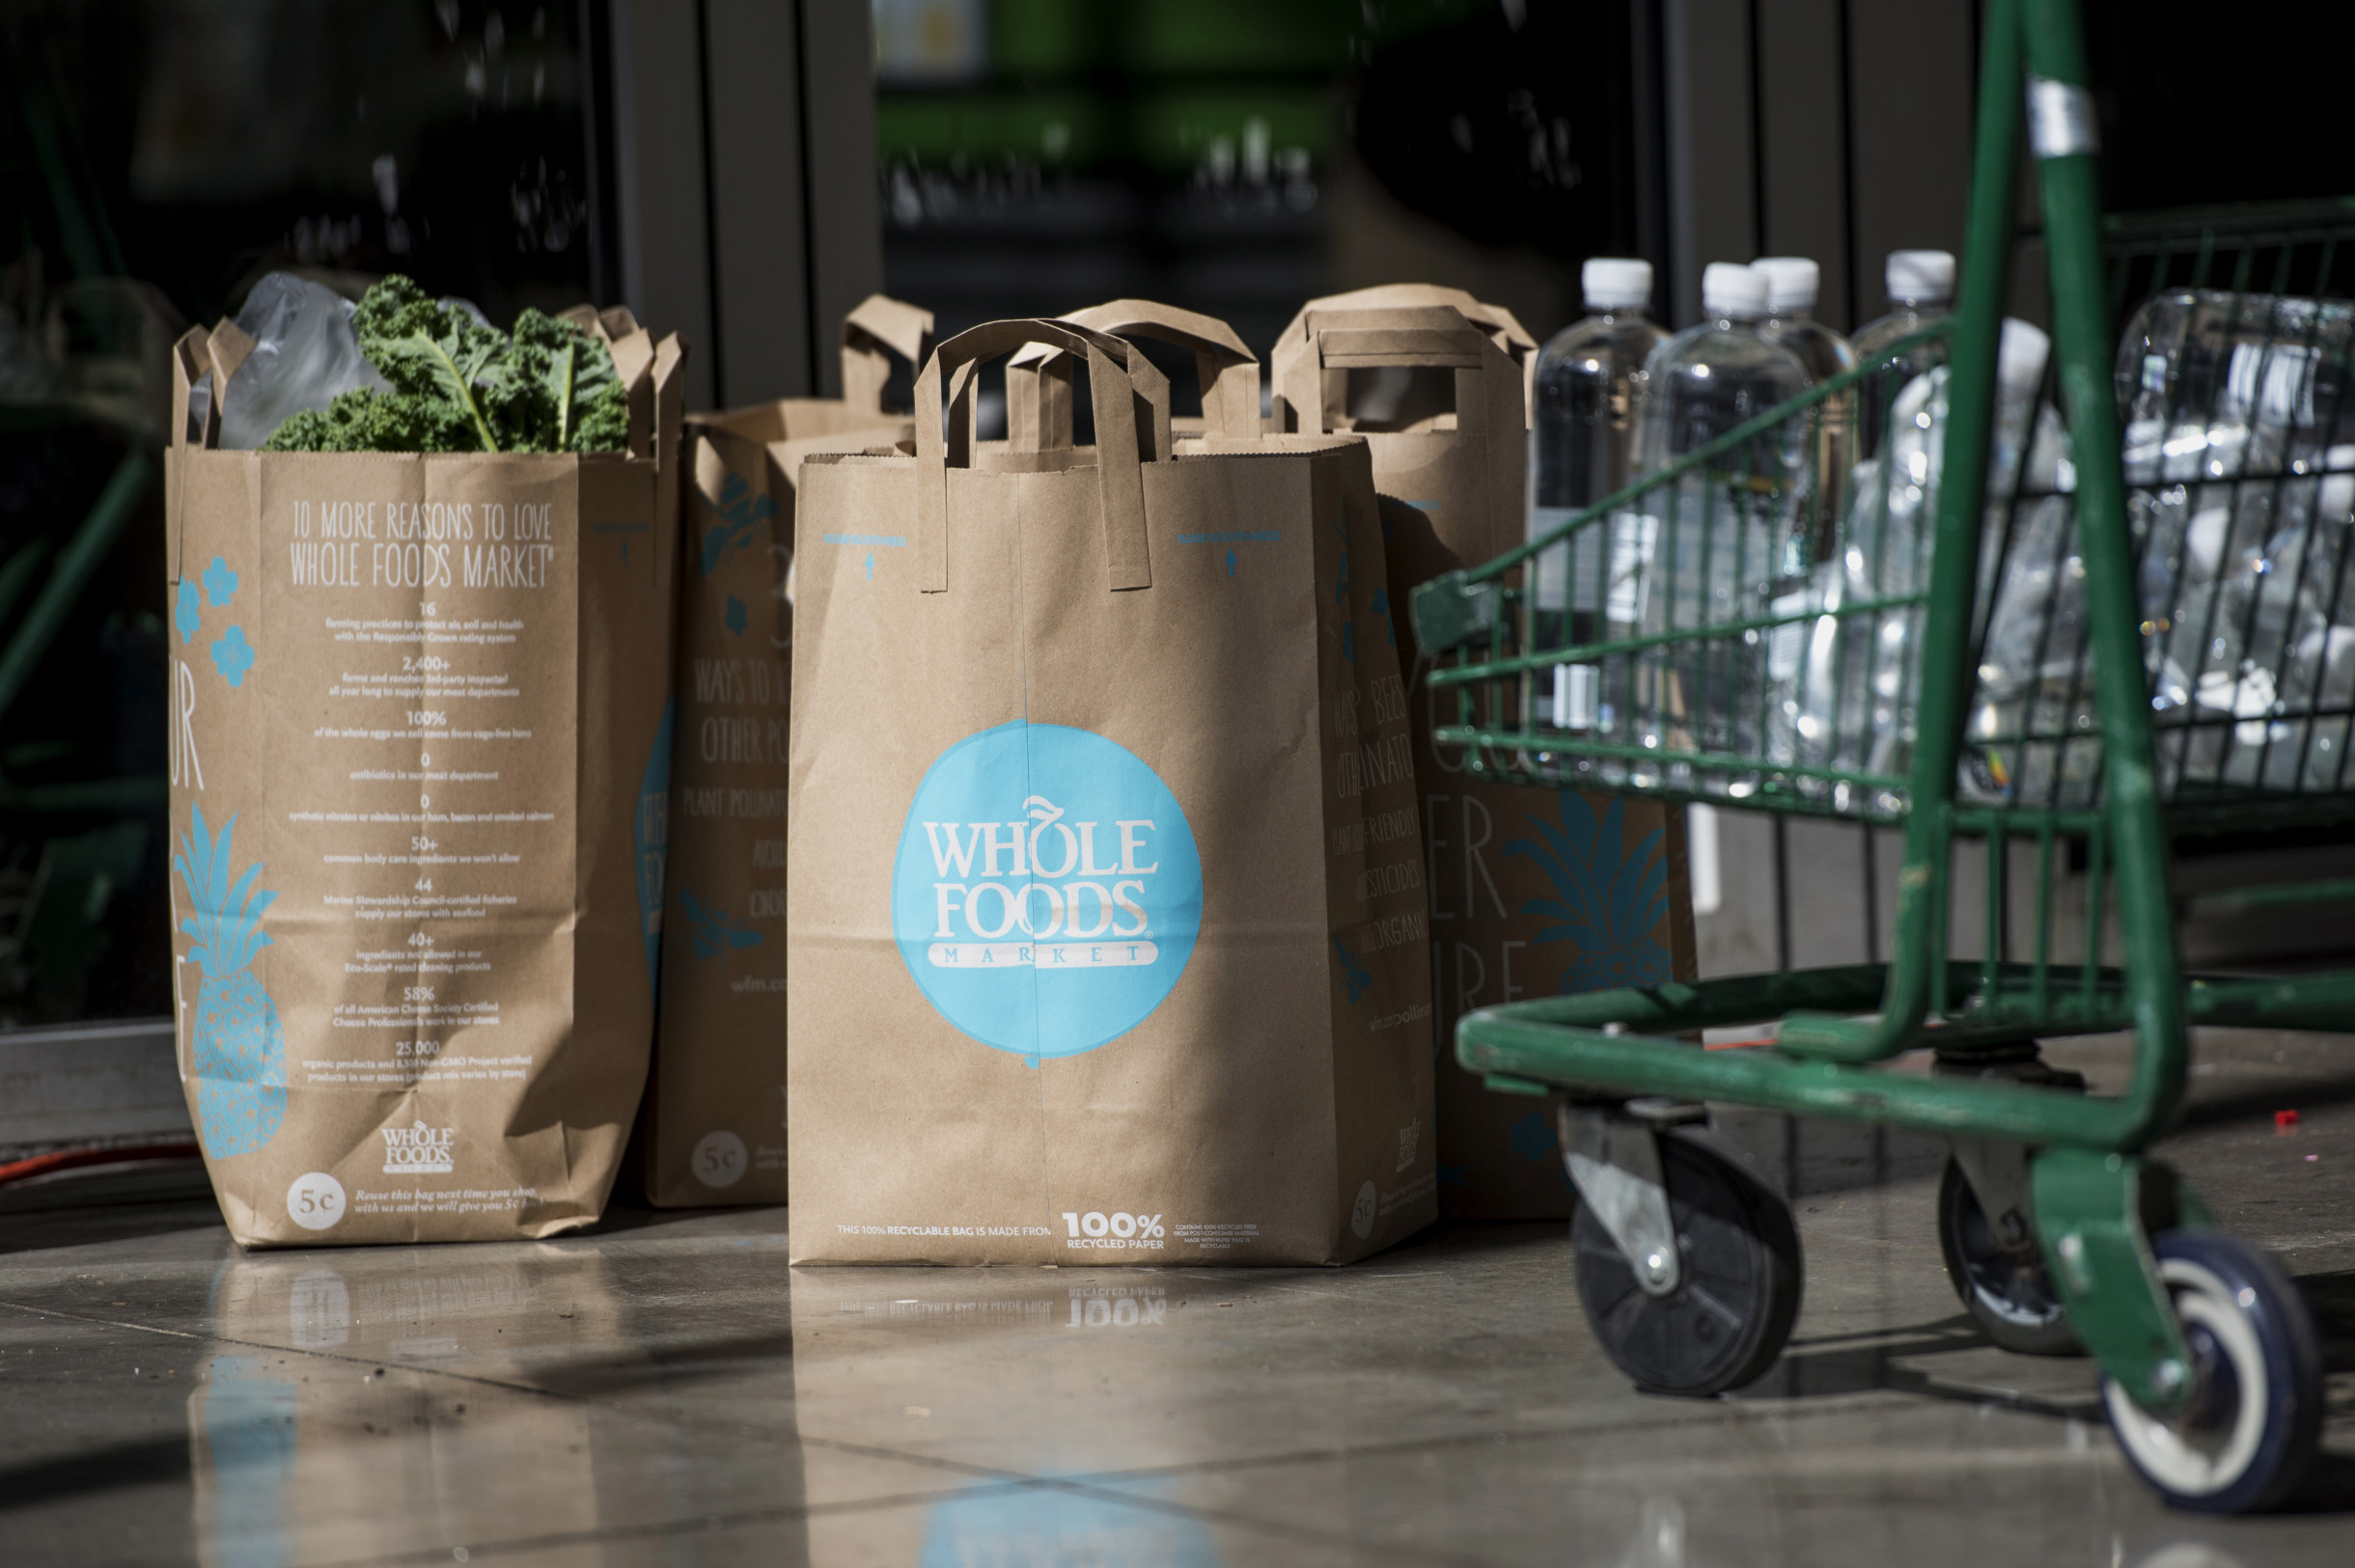 now delivers Whole Foods products to your home in two hours